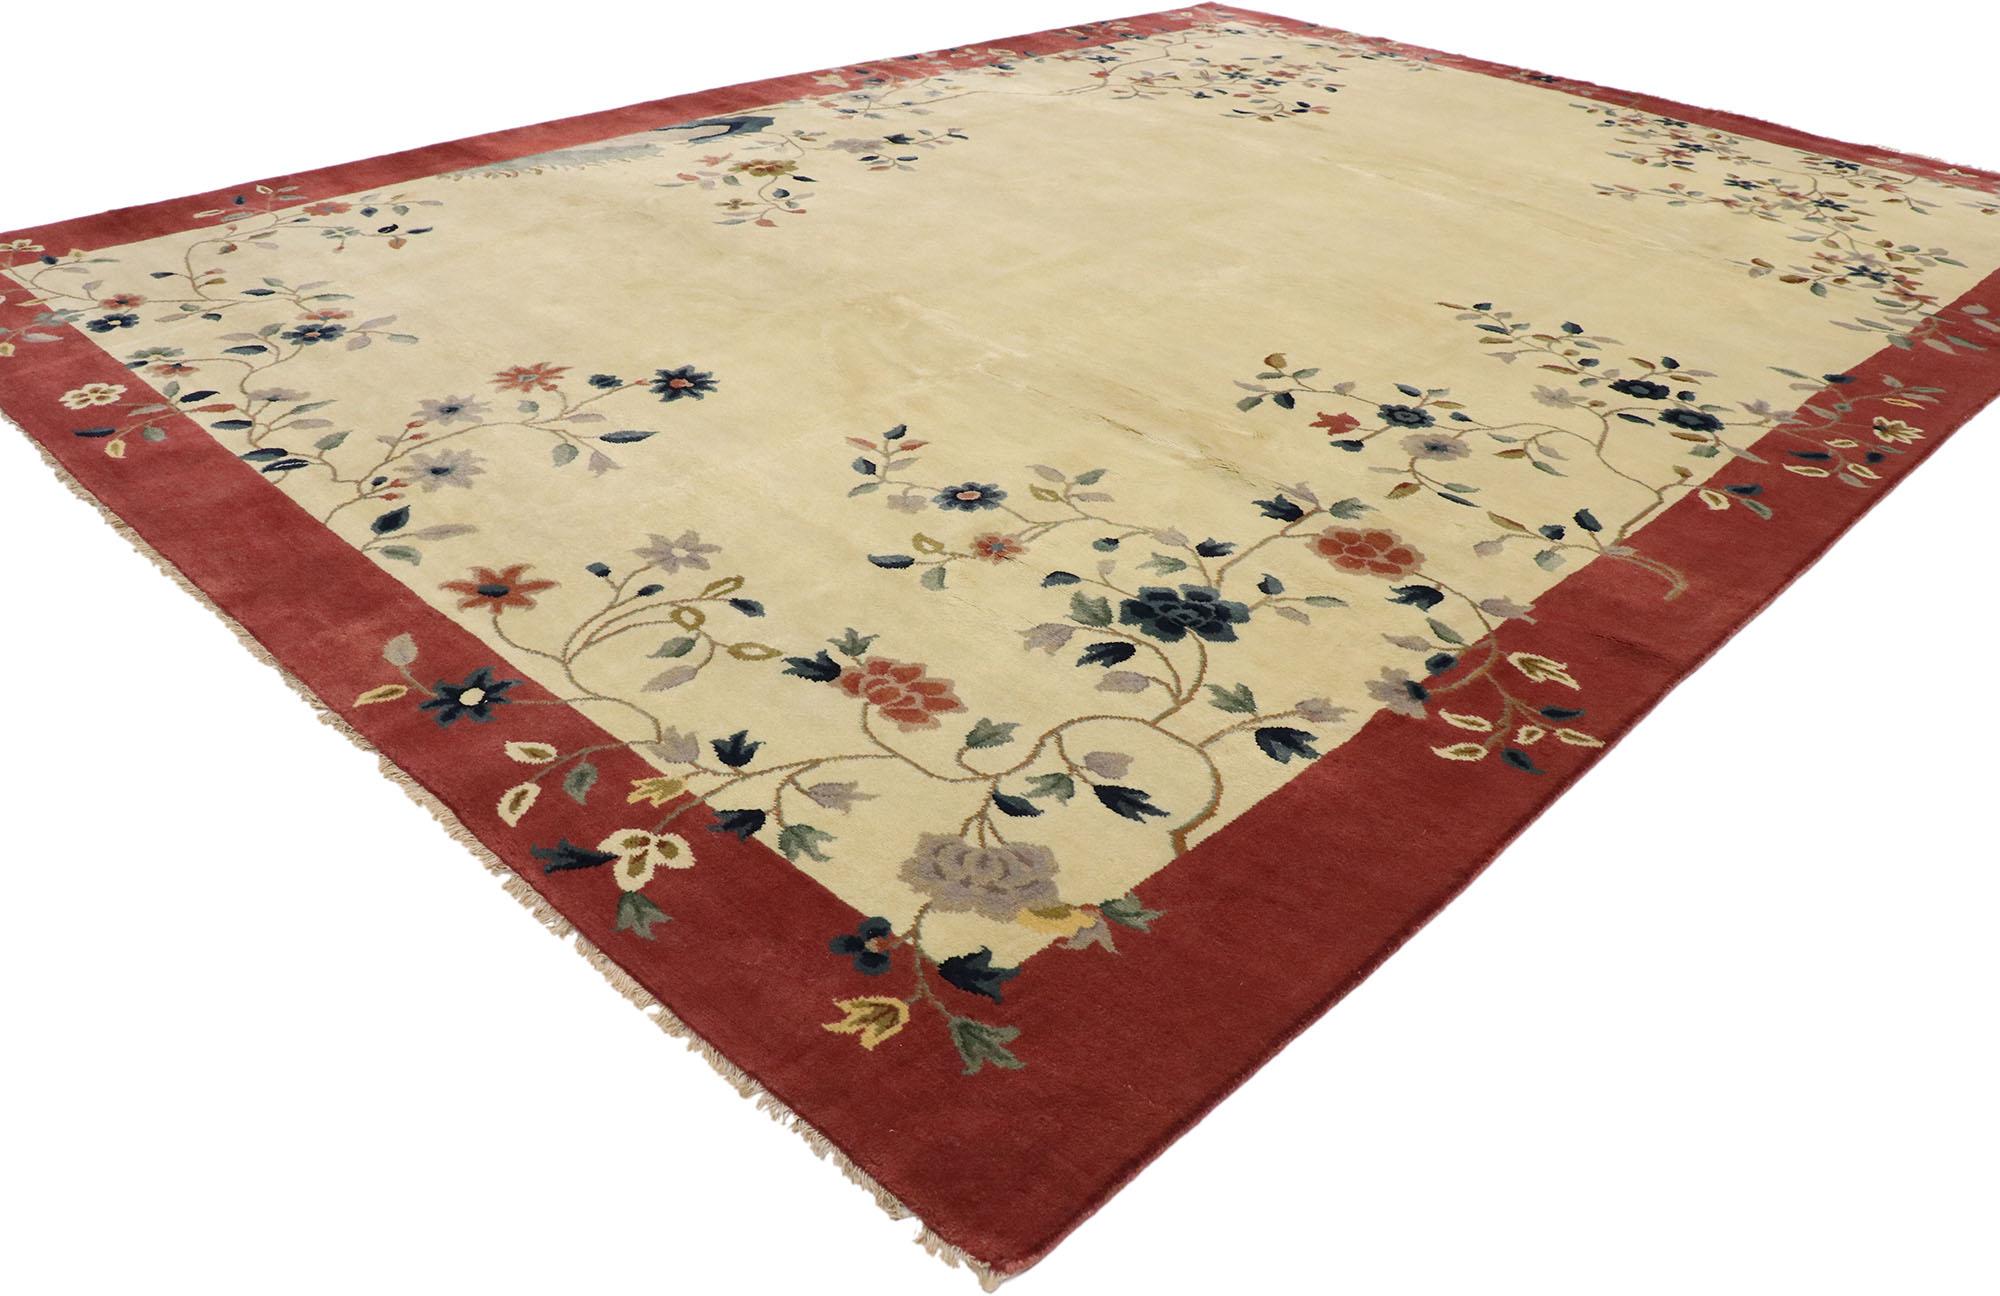 30552, new contemporary Chinese Art Deco rug inspired by Walter Nichols. Channeling the famed Walter Nichols style of the 1920s and 1930s, this hand knotted wool new contemporary Chinese Art Deco rug features a lustrous vanilla field and brick red